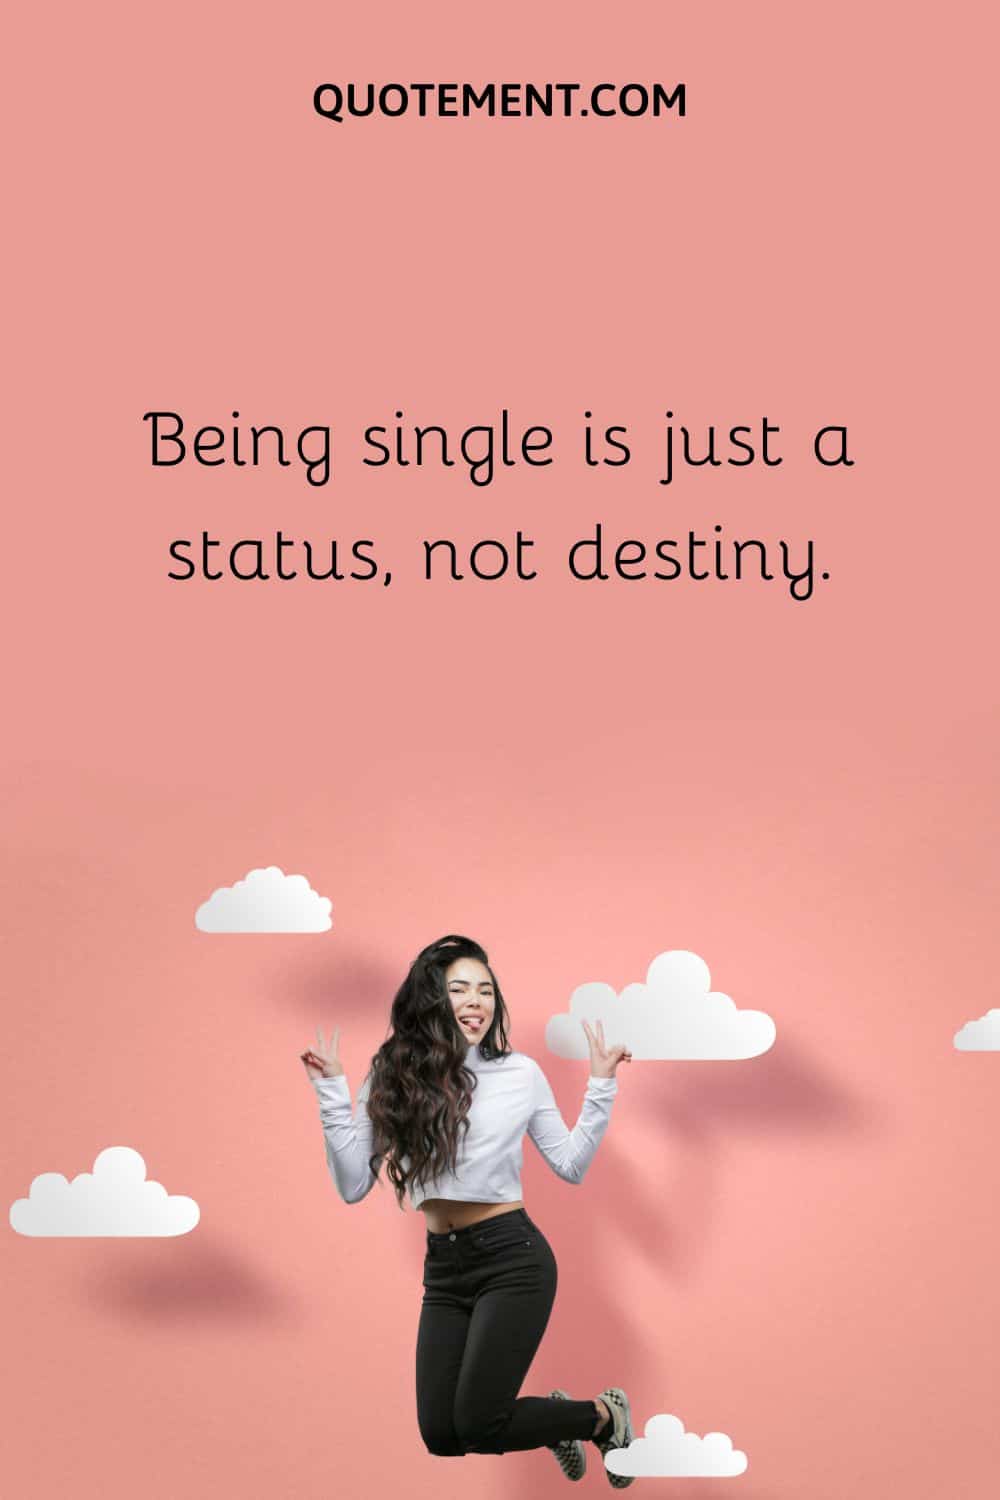 Being single is just a status, not destiny